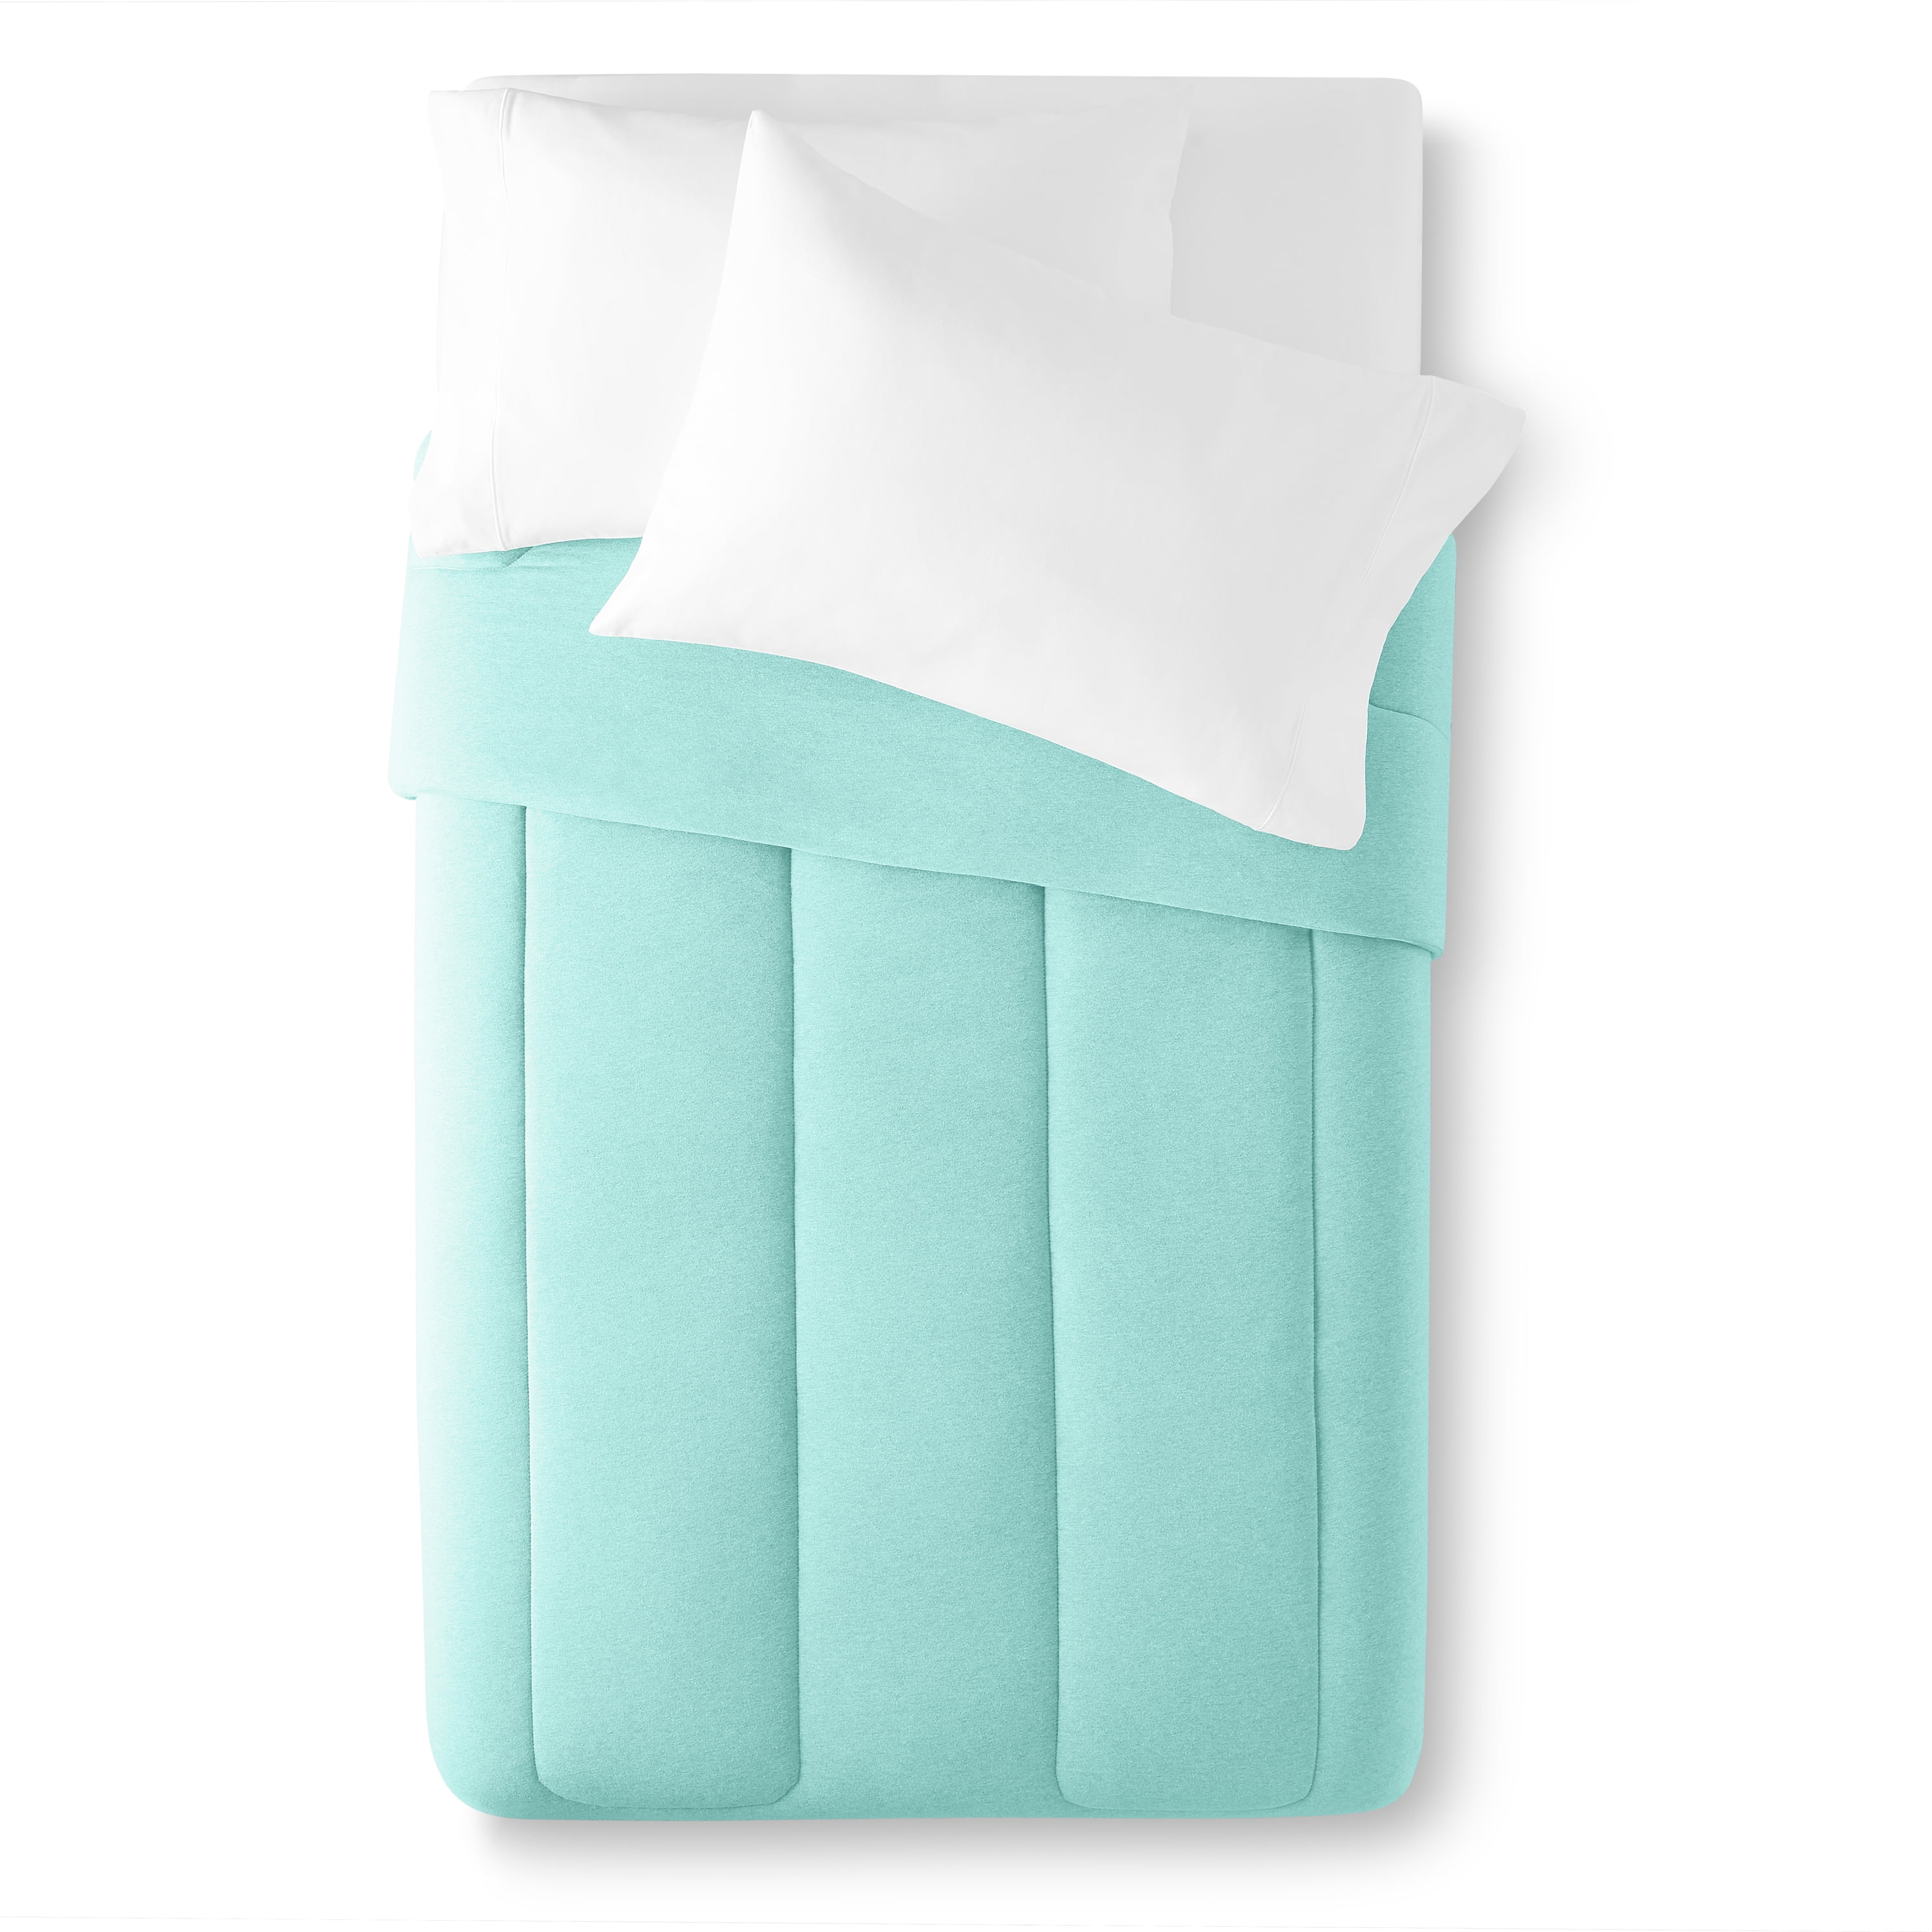 Jersey Knit 3 Piece Twin Size Sheets Set (Turquoise) - ITEM #JKC-T-TWN